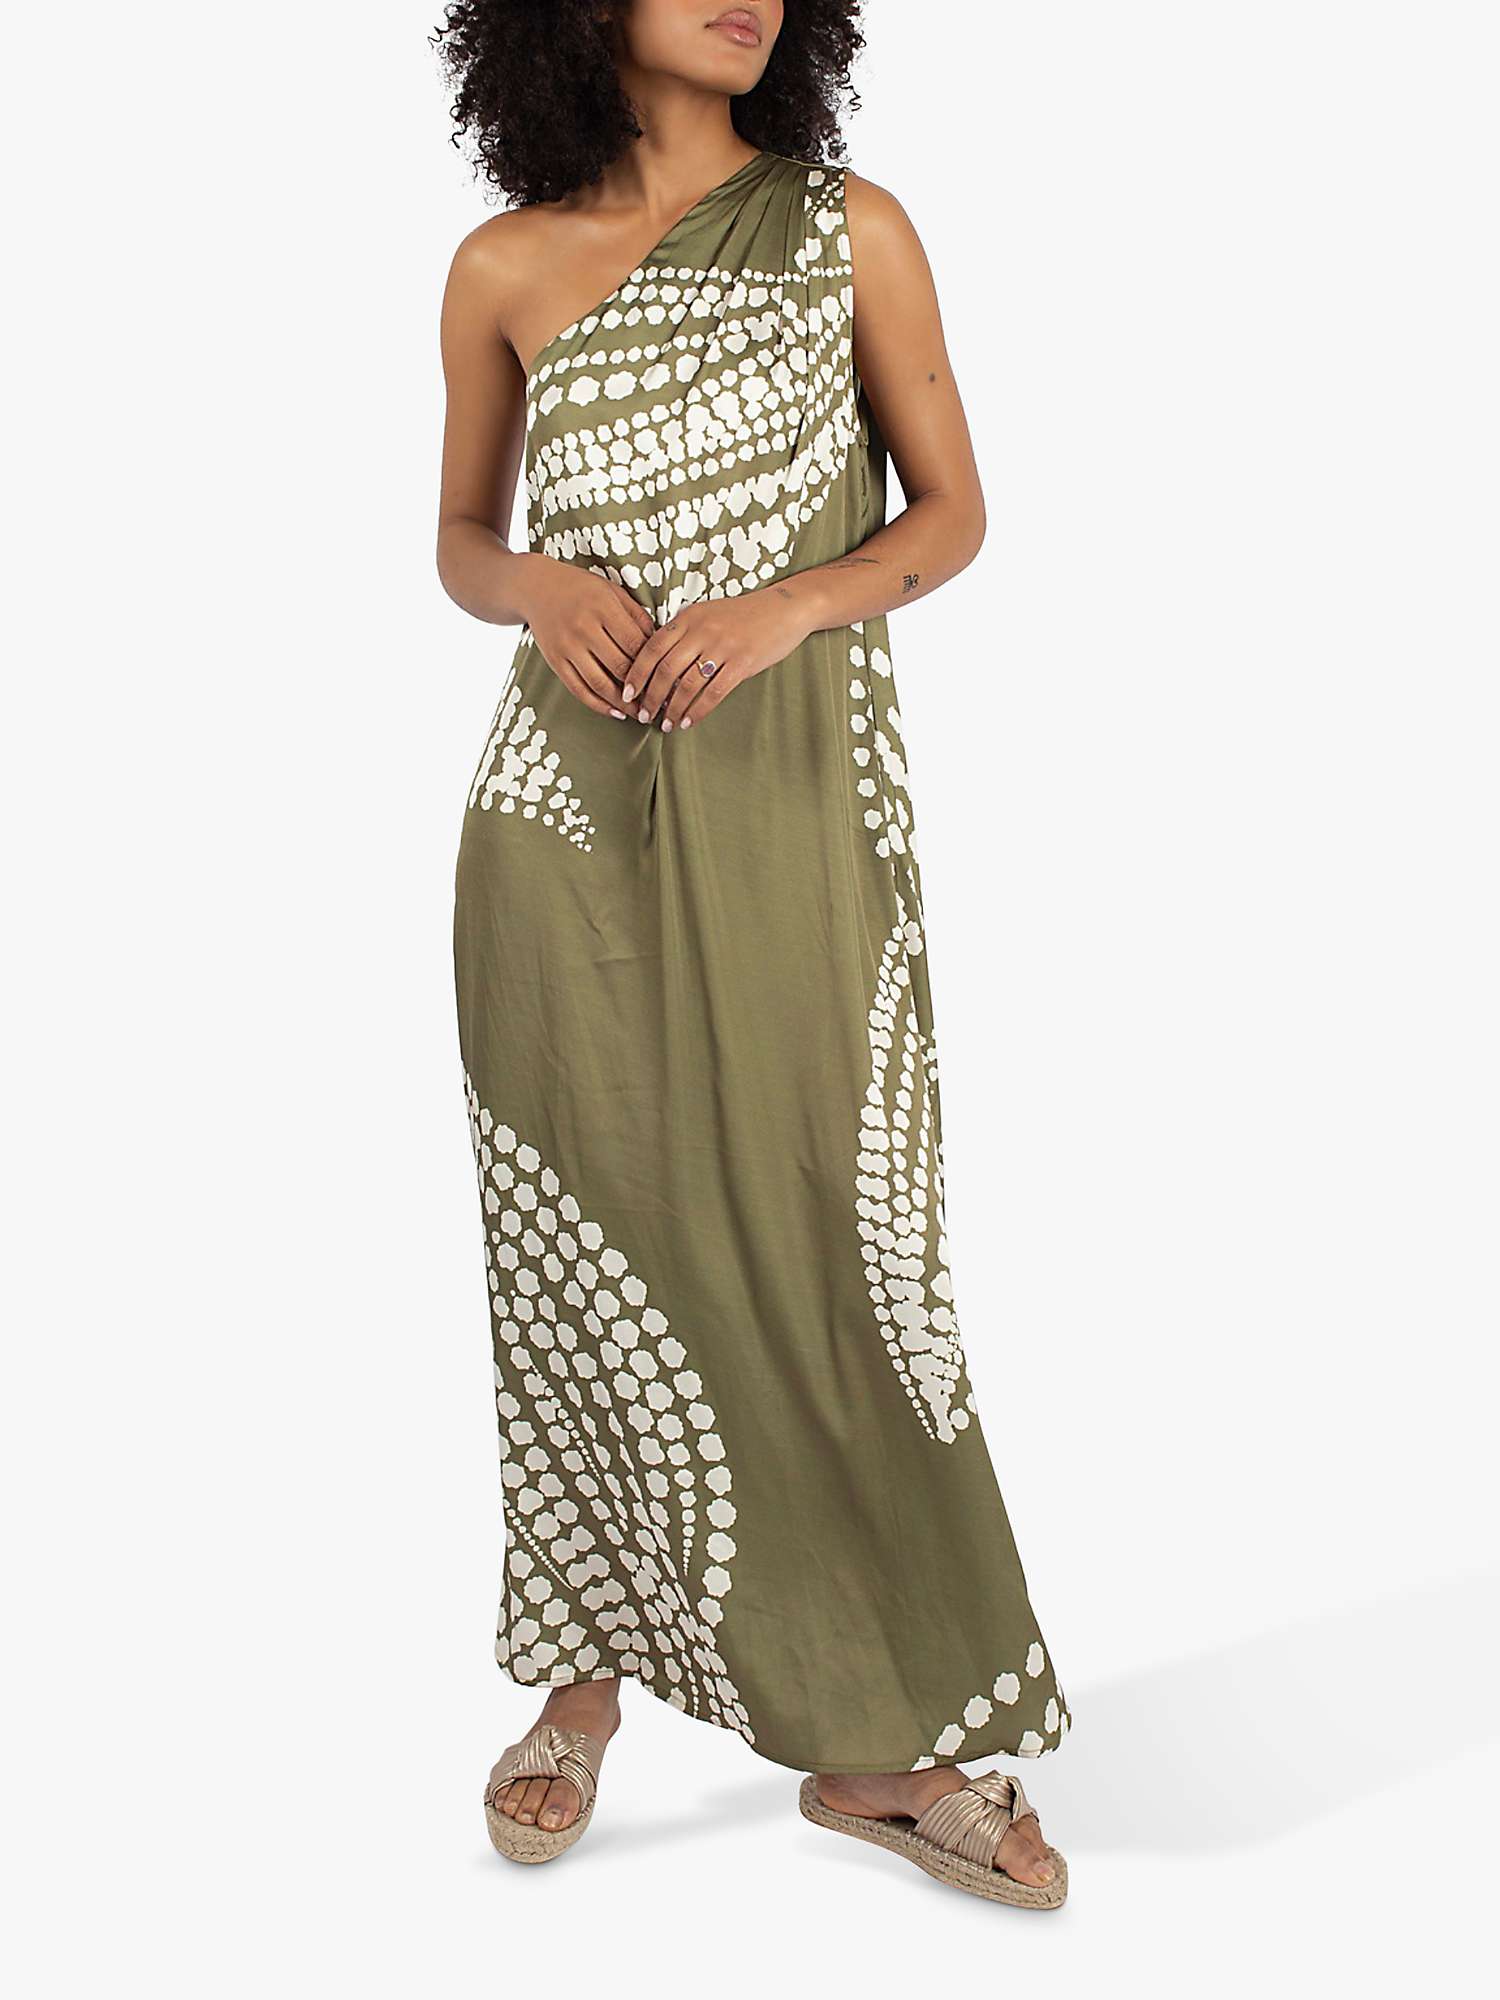 Buy Traffic People The Odes Gia Maxi Dress, Olive Online at johnlewis.com